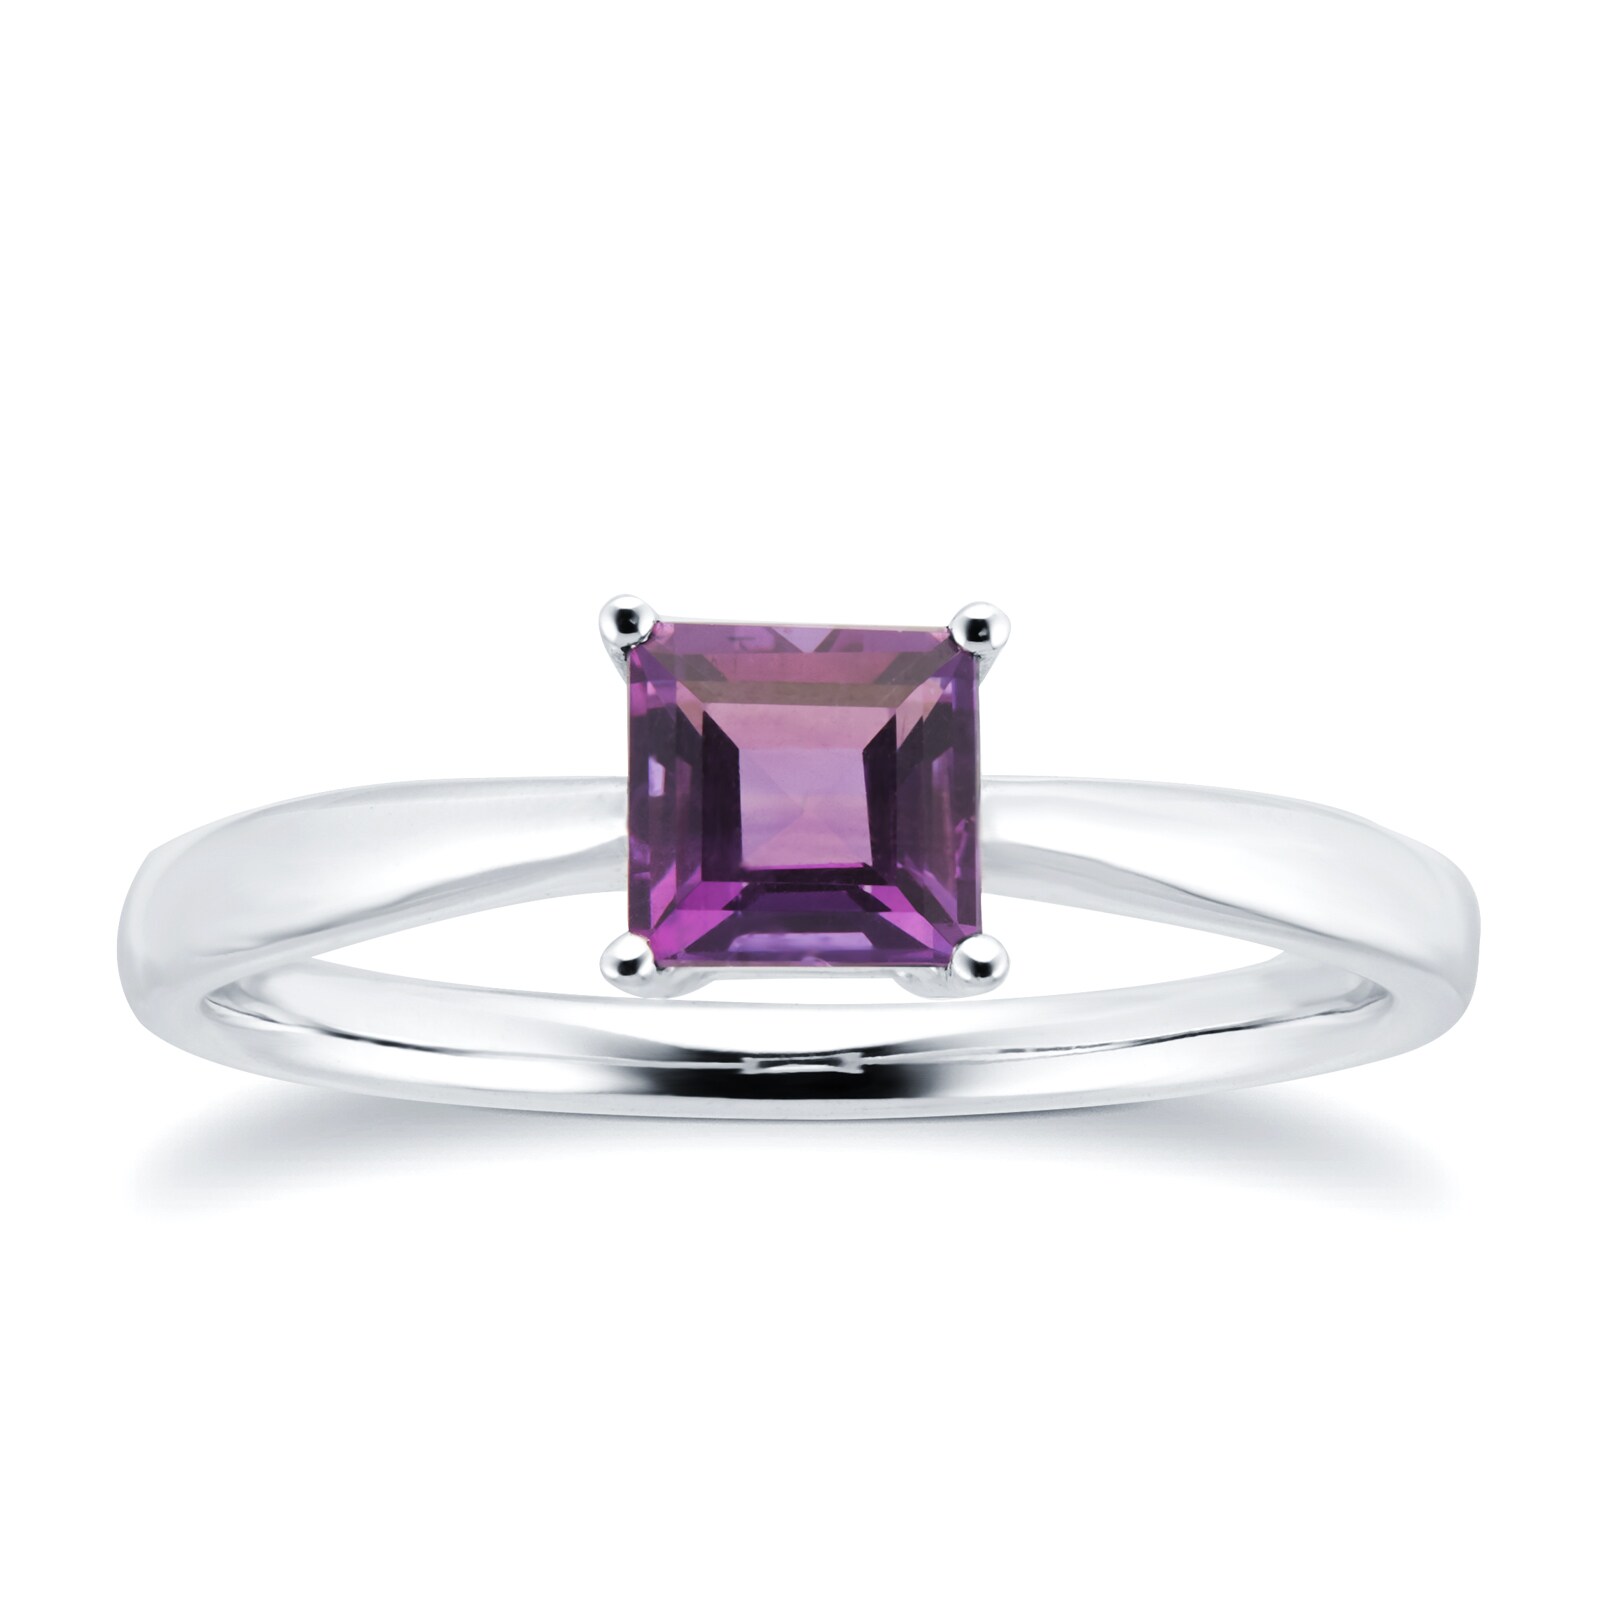 9ct White Gold 4 Claw Square Amethyst 5mm x 5mm Ring- Ring Size N